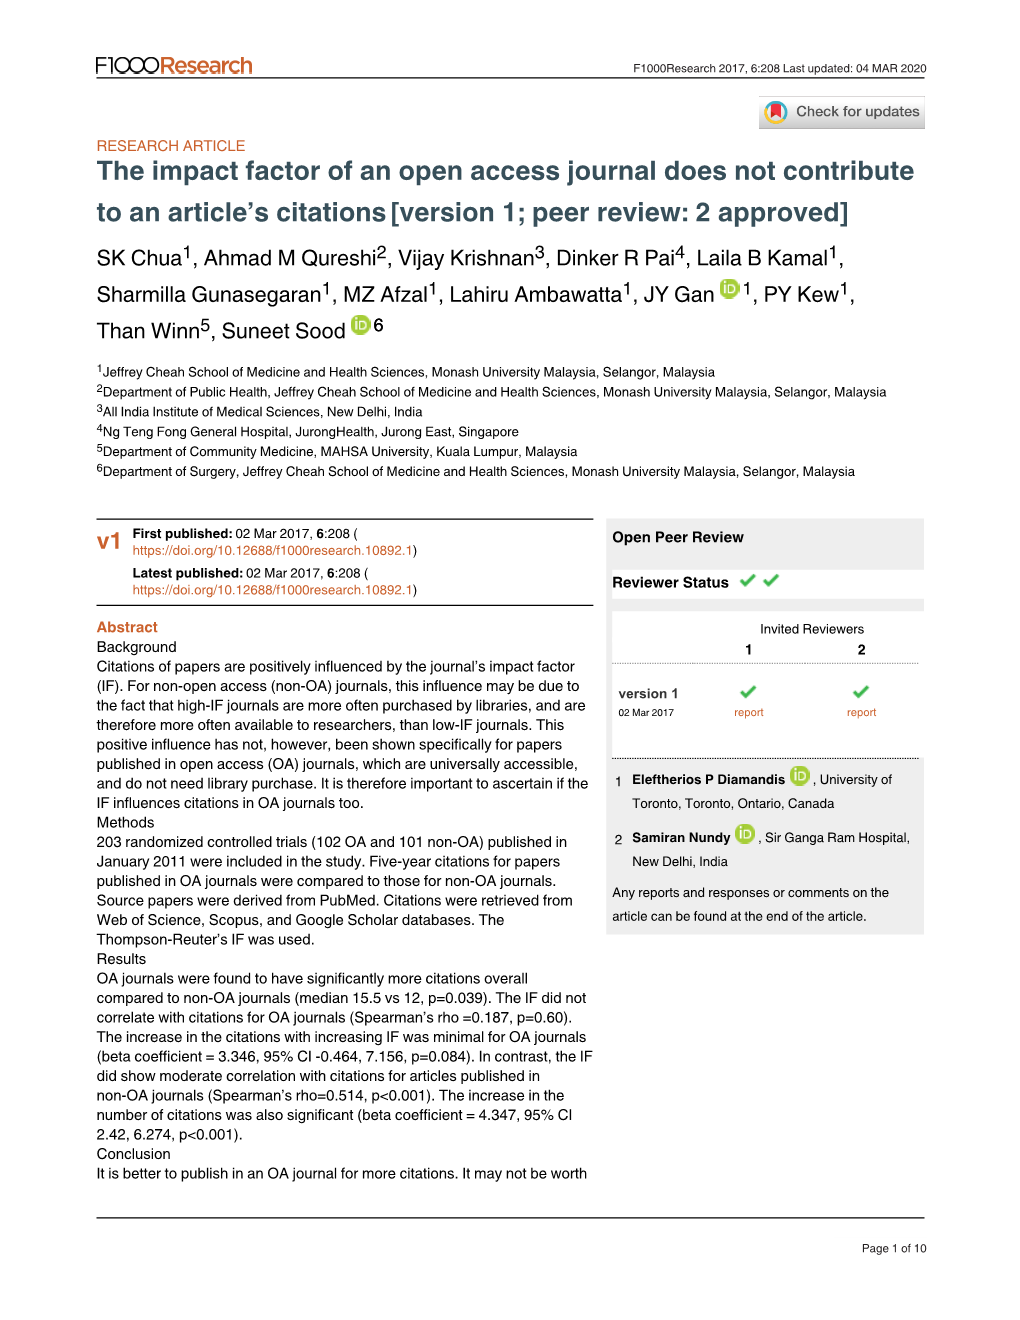 The Impact Factor of an Open Access Journal Does Not Contribute to An